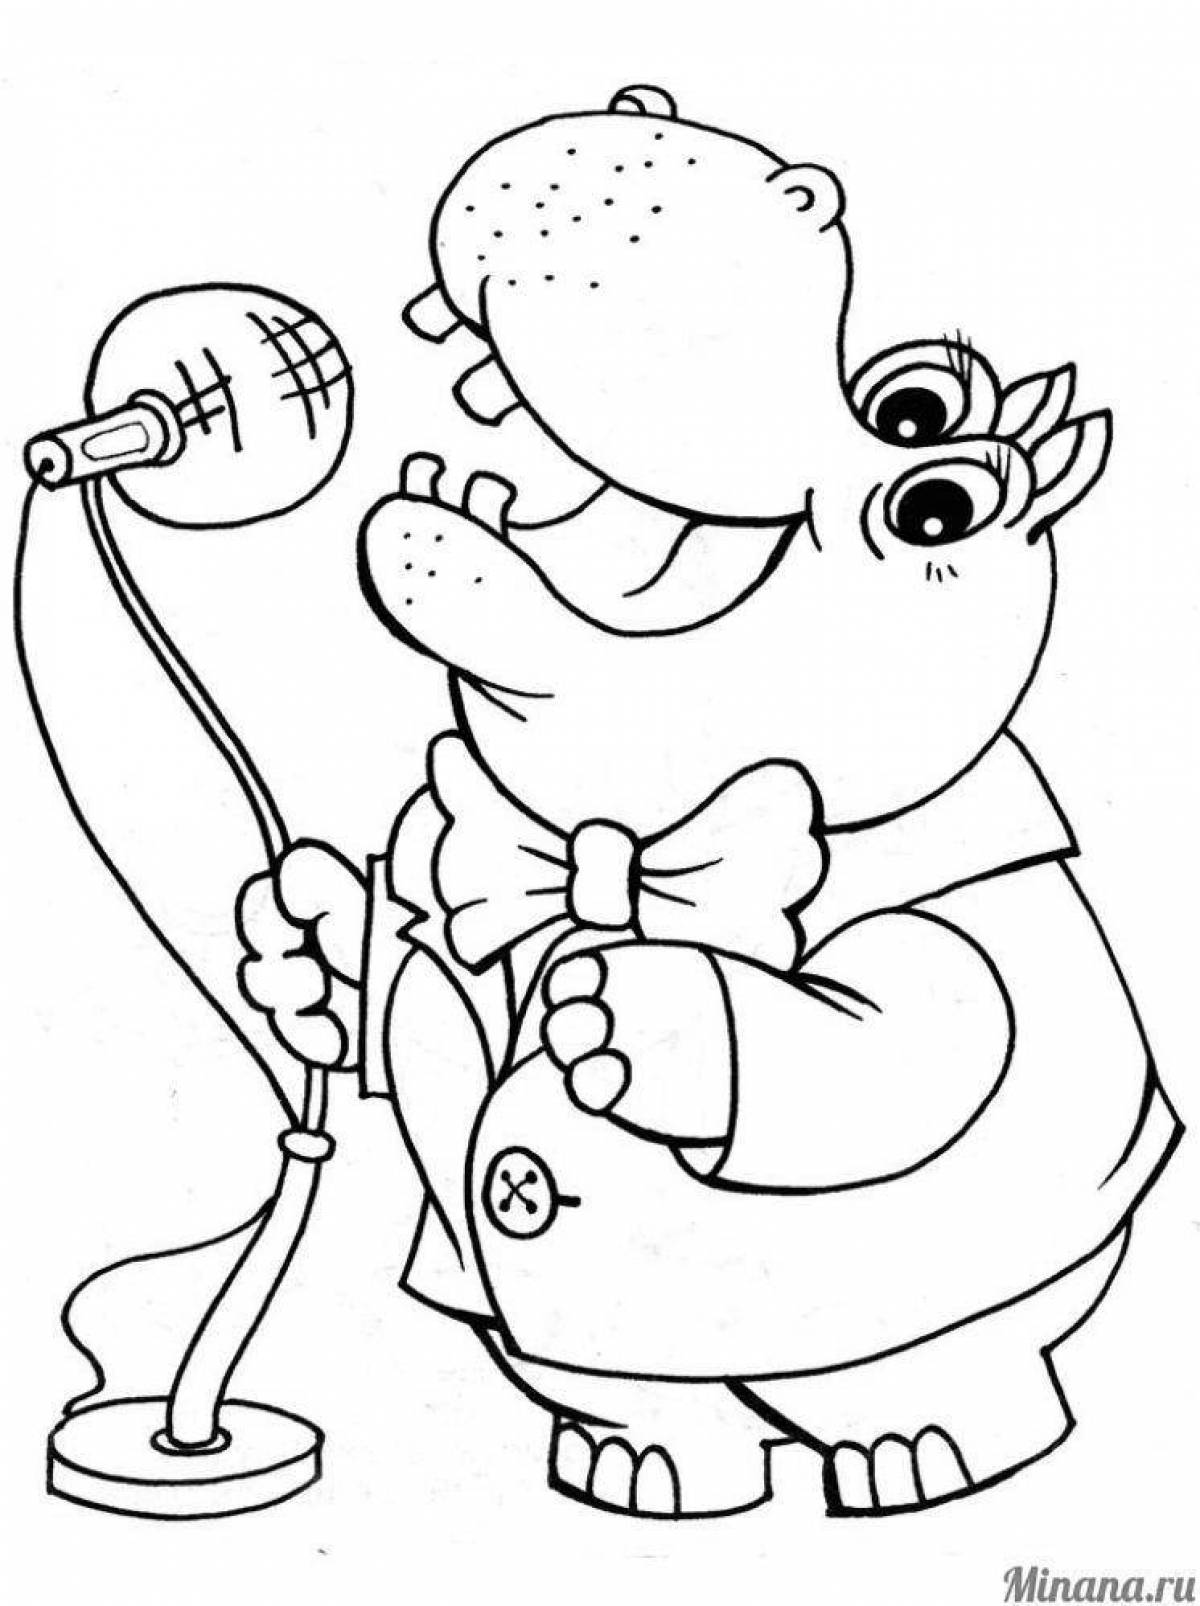 Amazing coloring pages funny